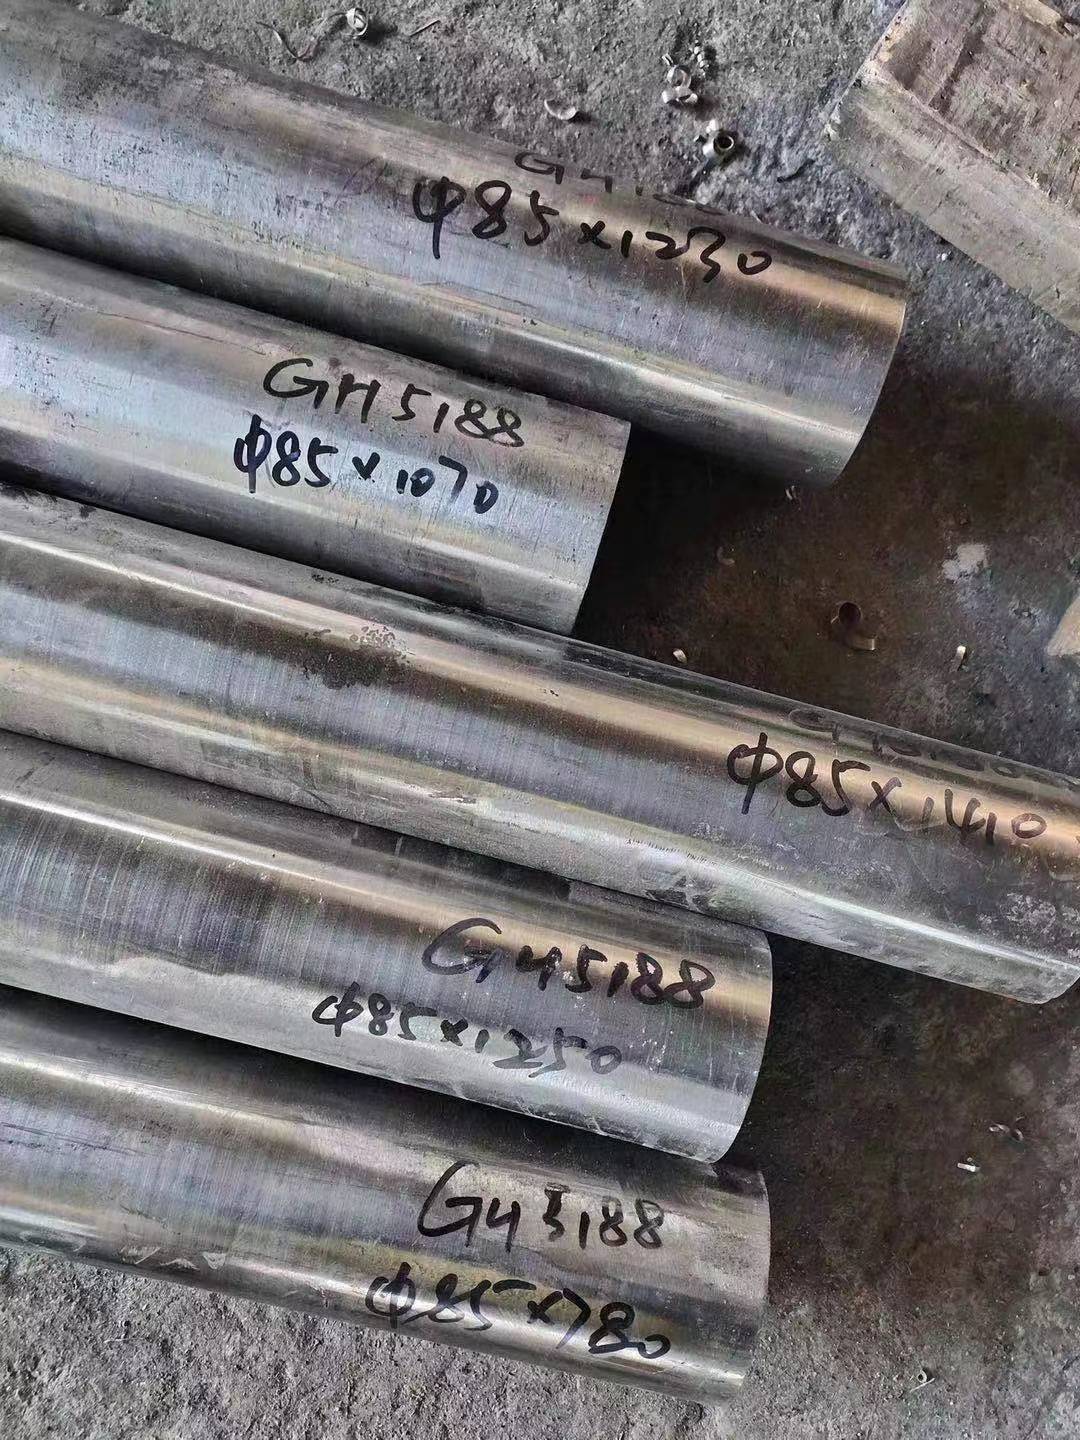 Manufacturer of 2507 Stainless Steel Strip - Hastelloy188 Alloy188 Gh5188/Gh188 Uns R30188 Haynes No. 188/Ha188 Alloy Steel Bar/Rod – Cepheus